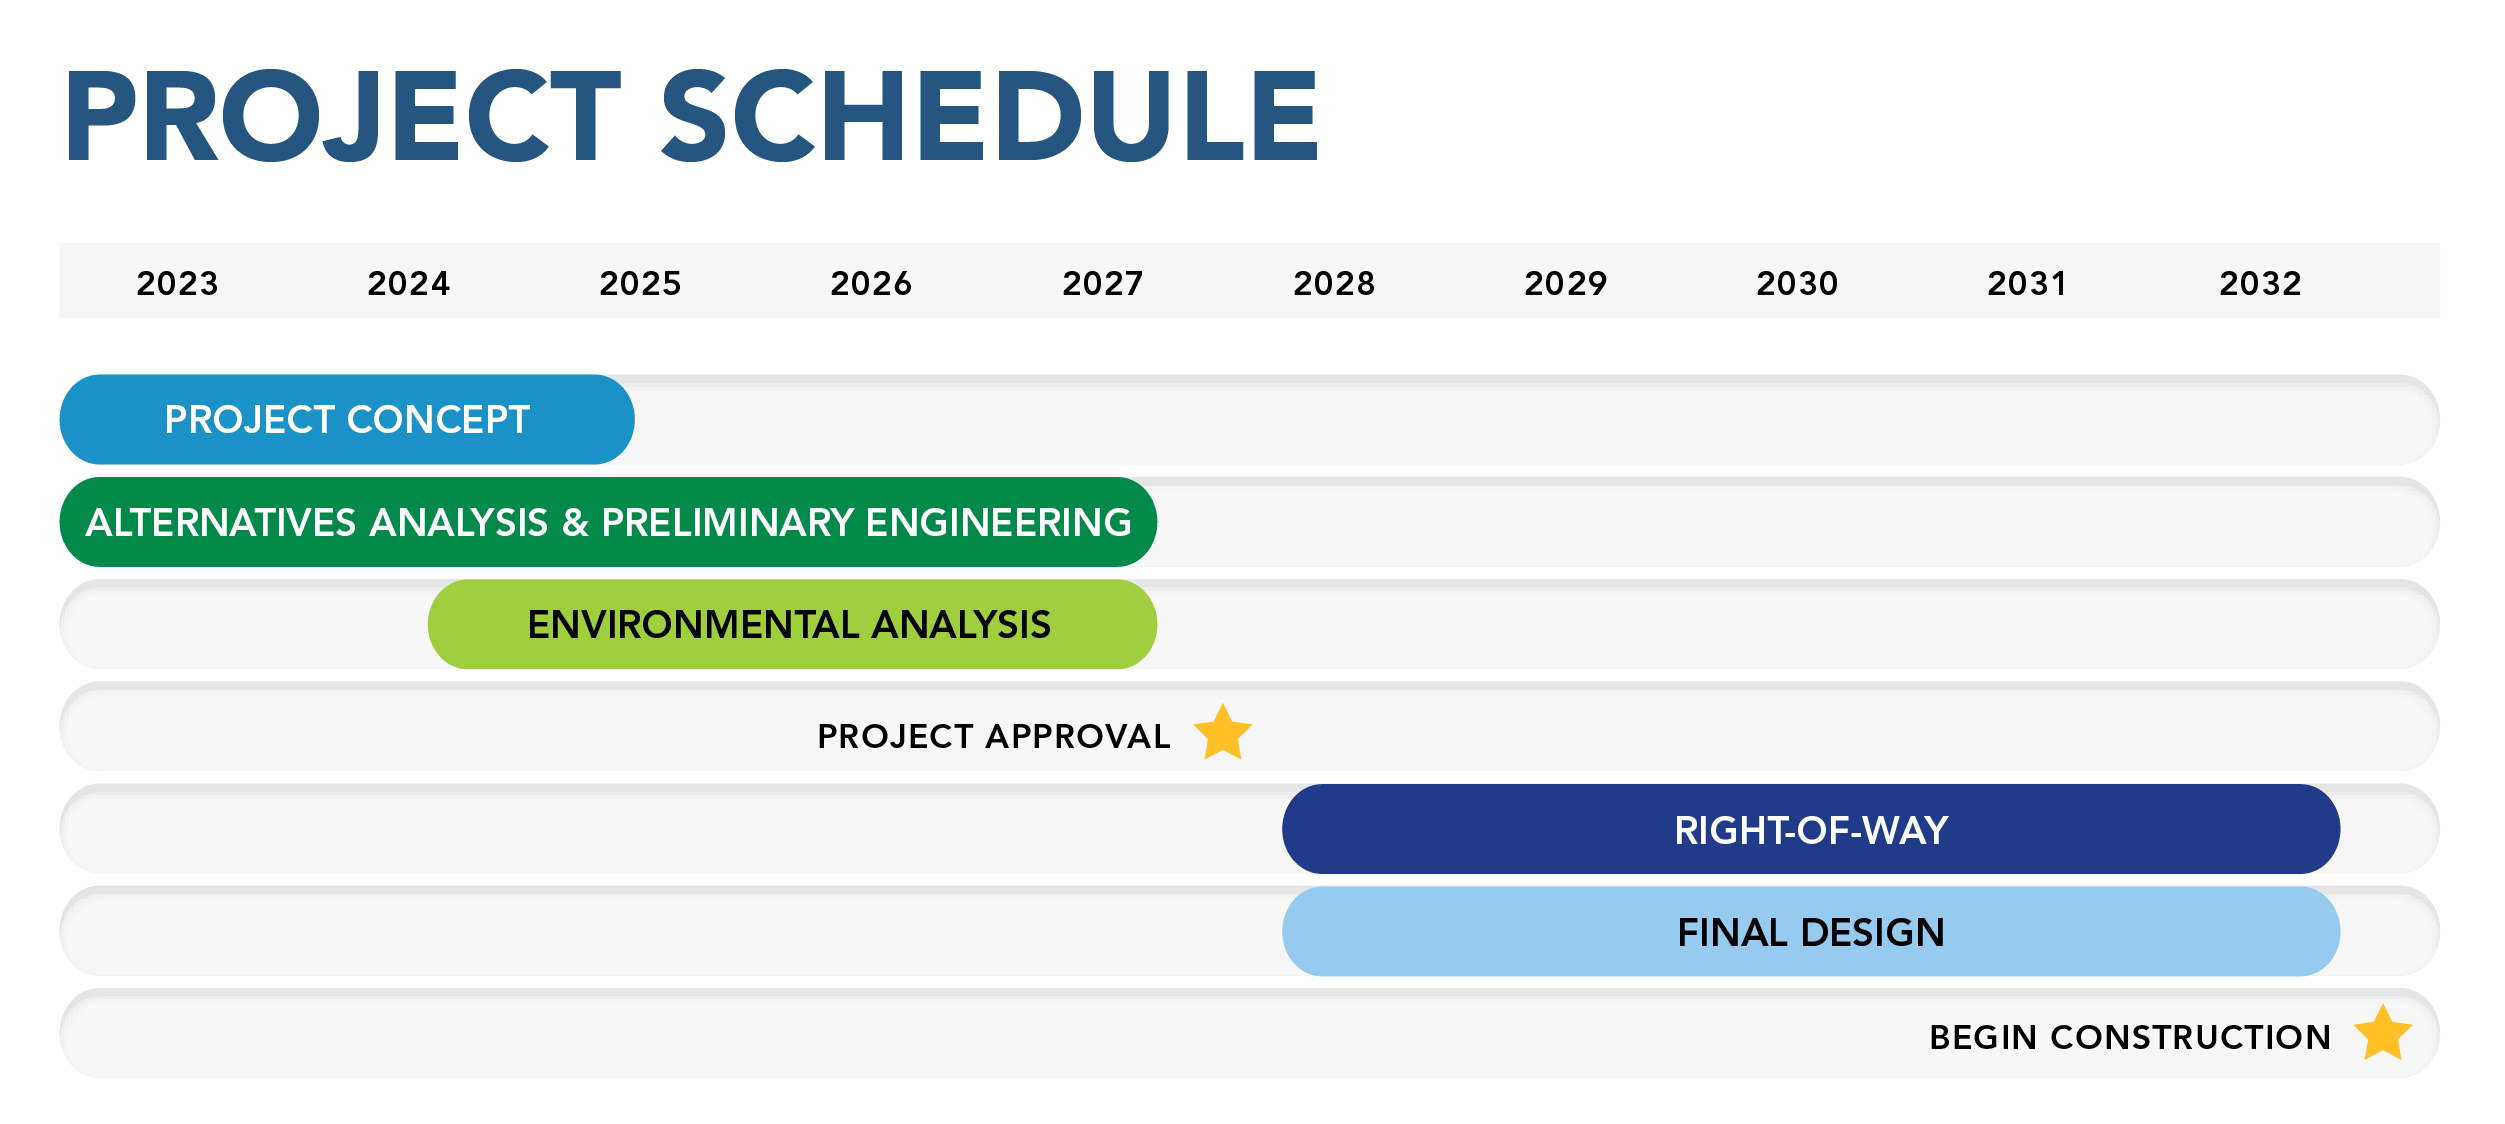 Image shows a timeline of the overall project schedule beginning with completion of the project concept report in 2025 through right of way and final design in 2032.